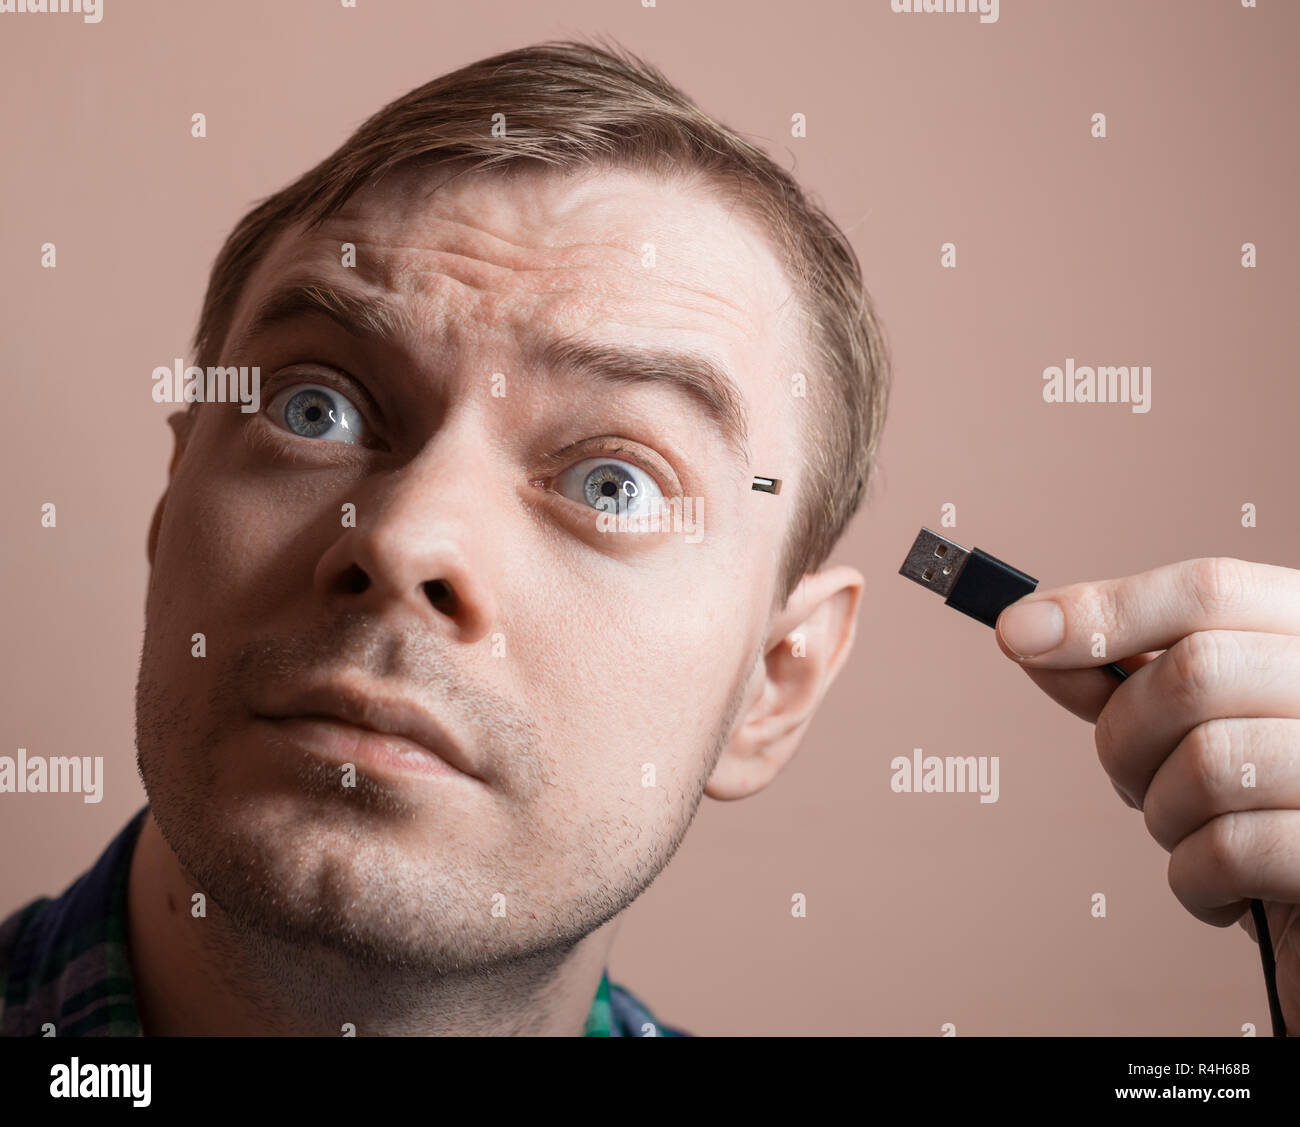 Young man with computer sockets in his head. Selective focus. Stock Photo